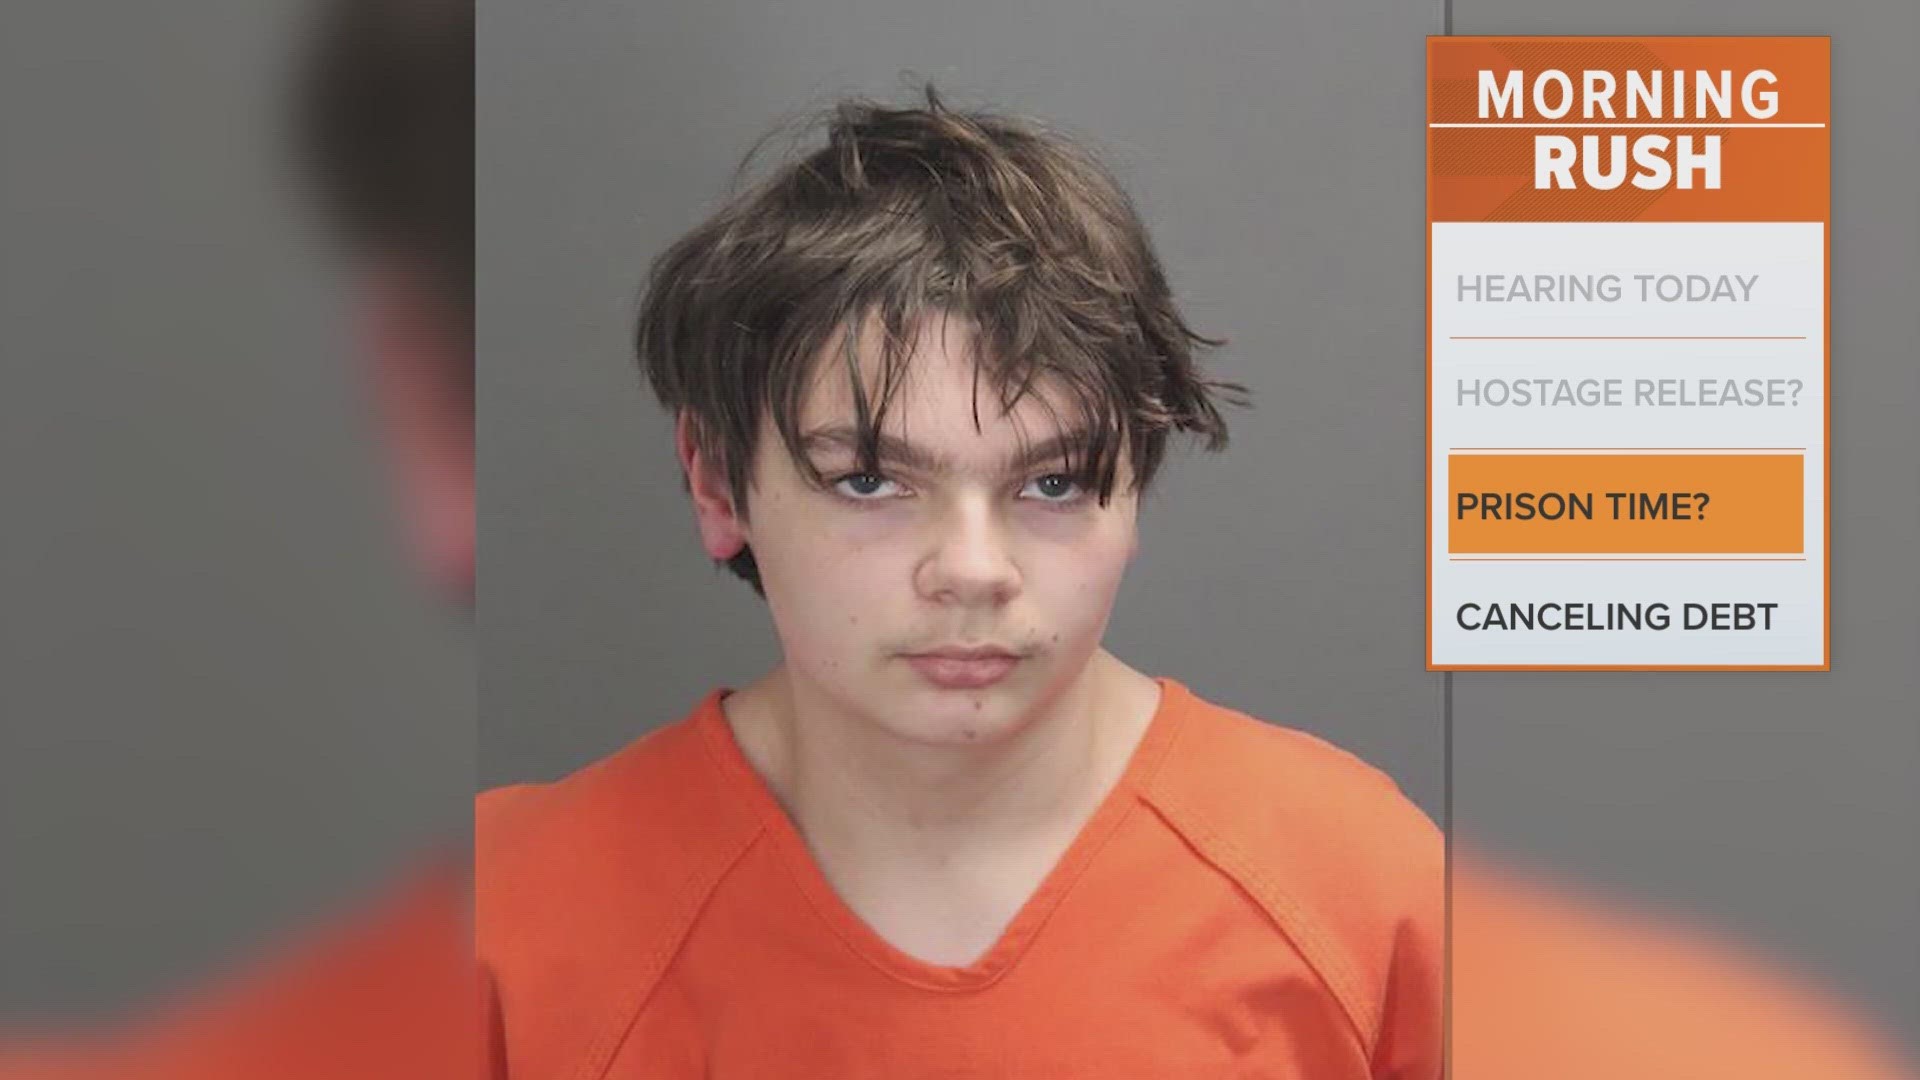 Ethan Crumbley's parents James and Jennifer were found guilty in connection the 2021 shooting deaths of four high school students.